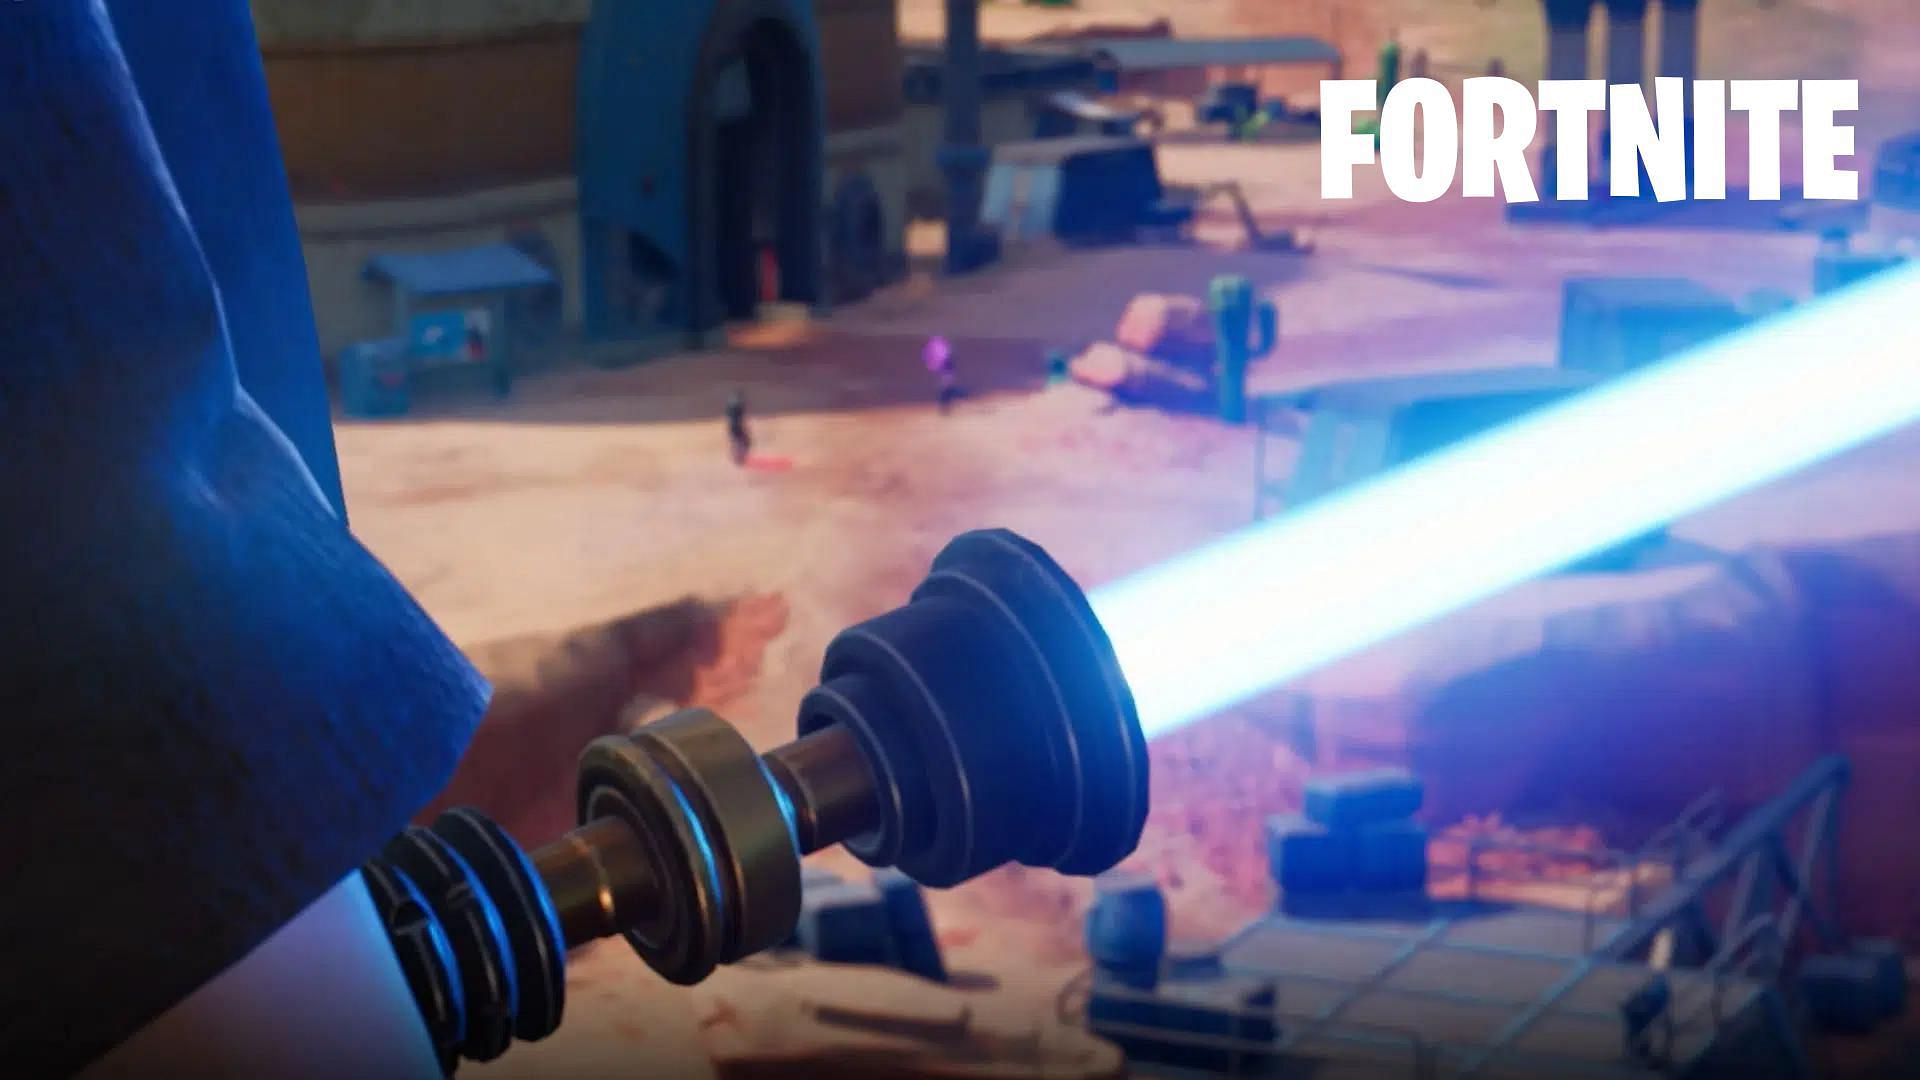 Lightsaber-style pickaxe may be arriving soon (Image via Epic Games)